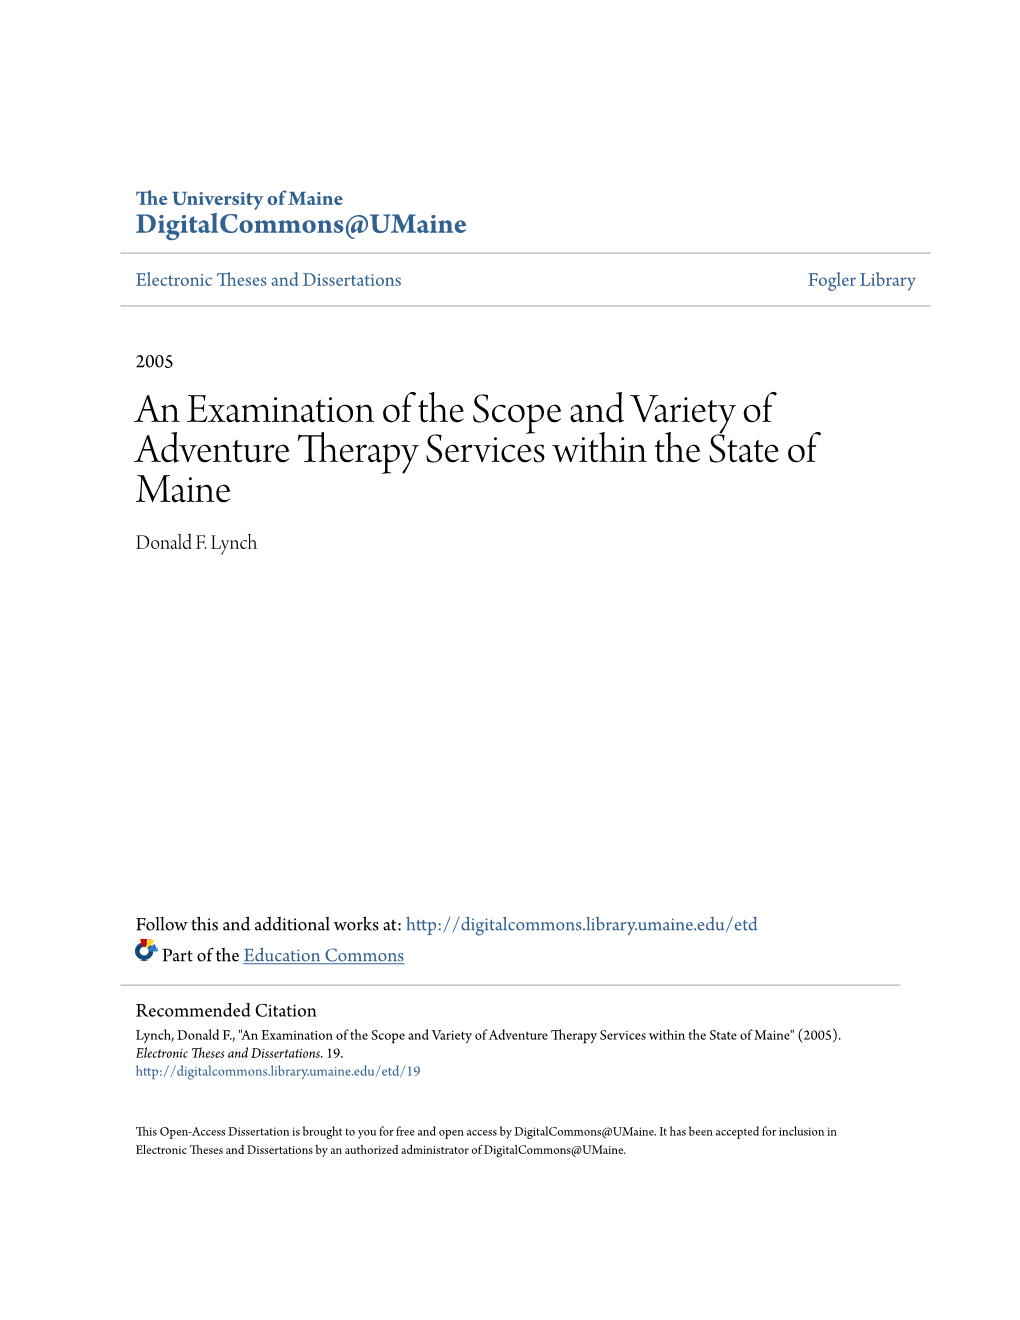 An Examination of the Scope and Variety of Adventure Therapy Services Within the State of Maine Donald F